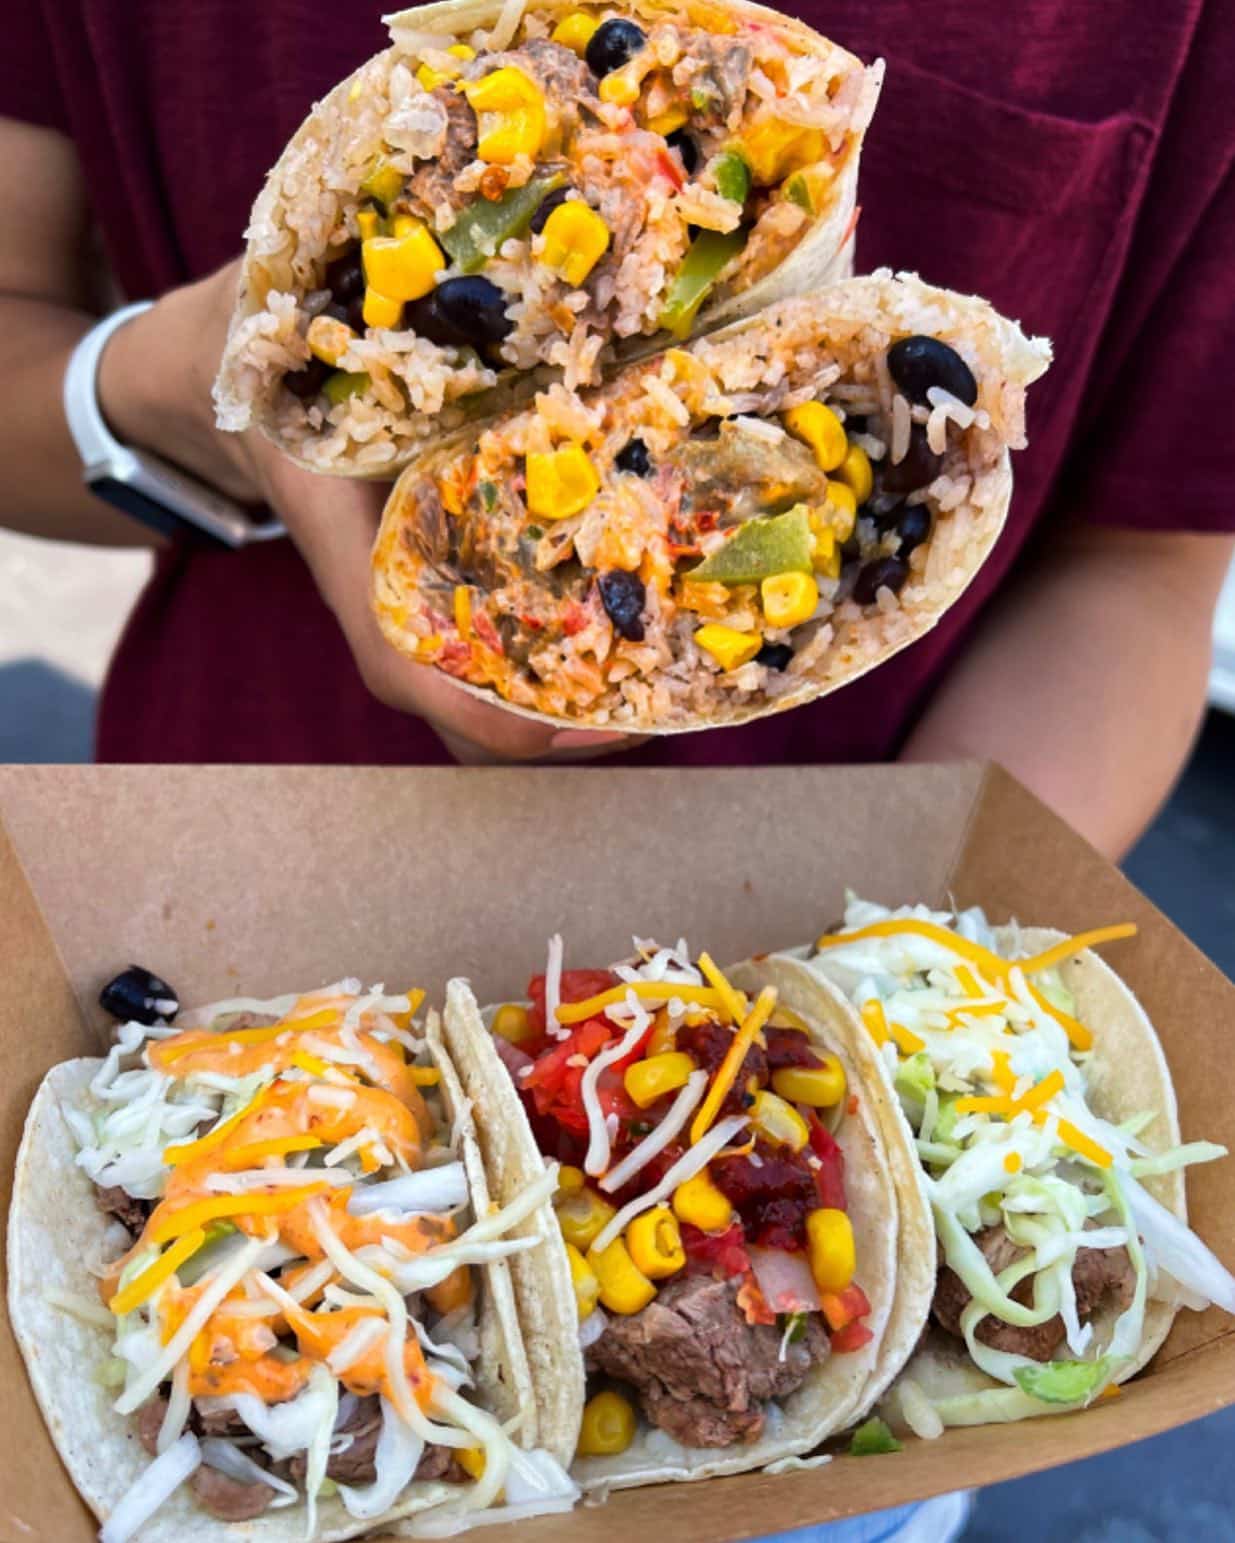 Burrito and variety of tacos from 5 Elementos food truck